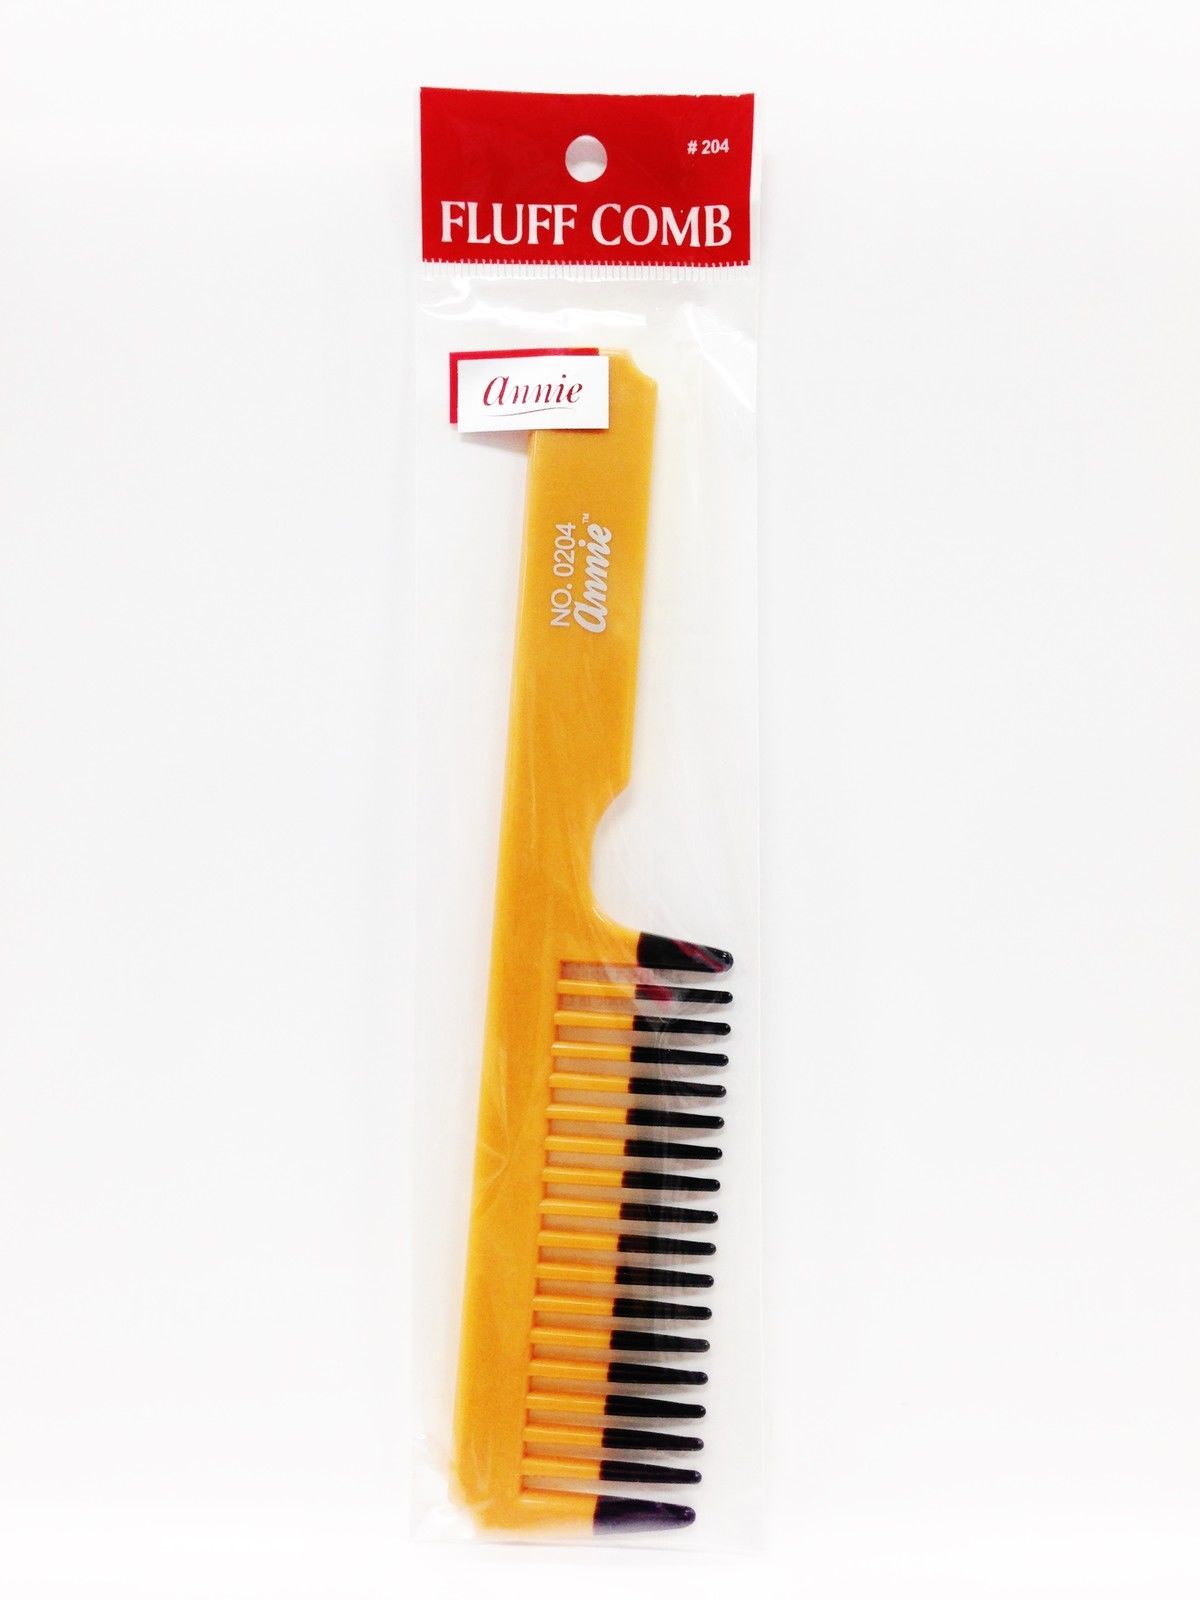 ANNIE FLUFF COMB #204 8.75" x 2" COLOR: ASSORTED - $1.00